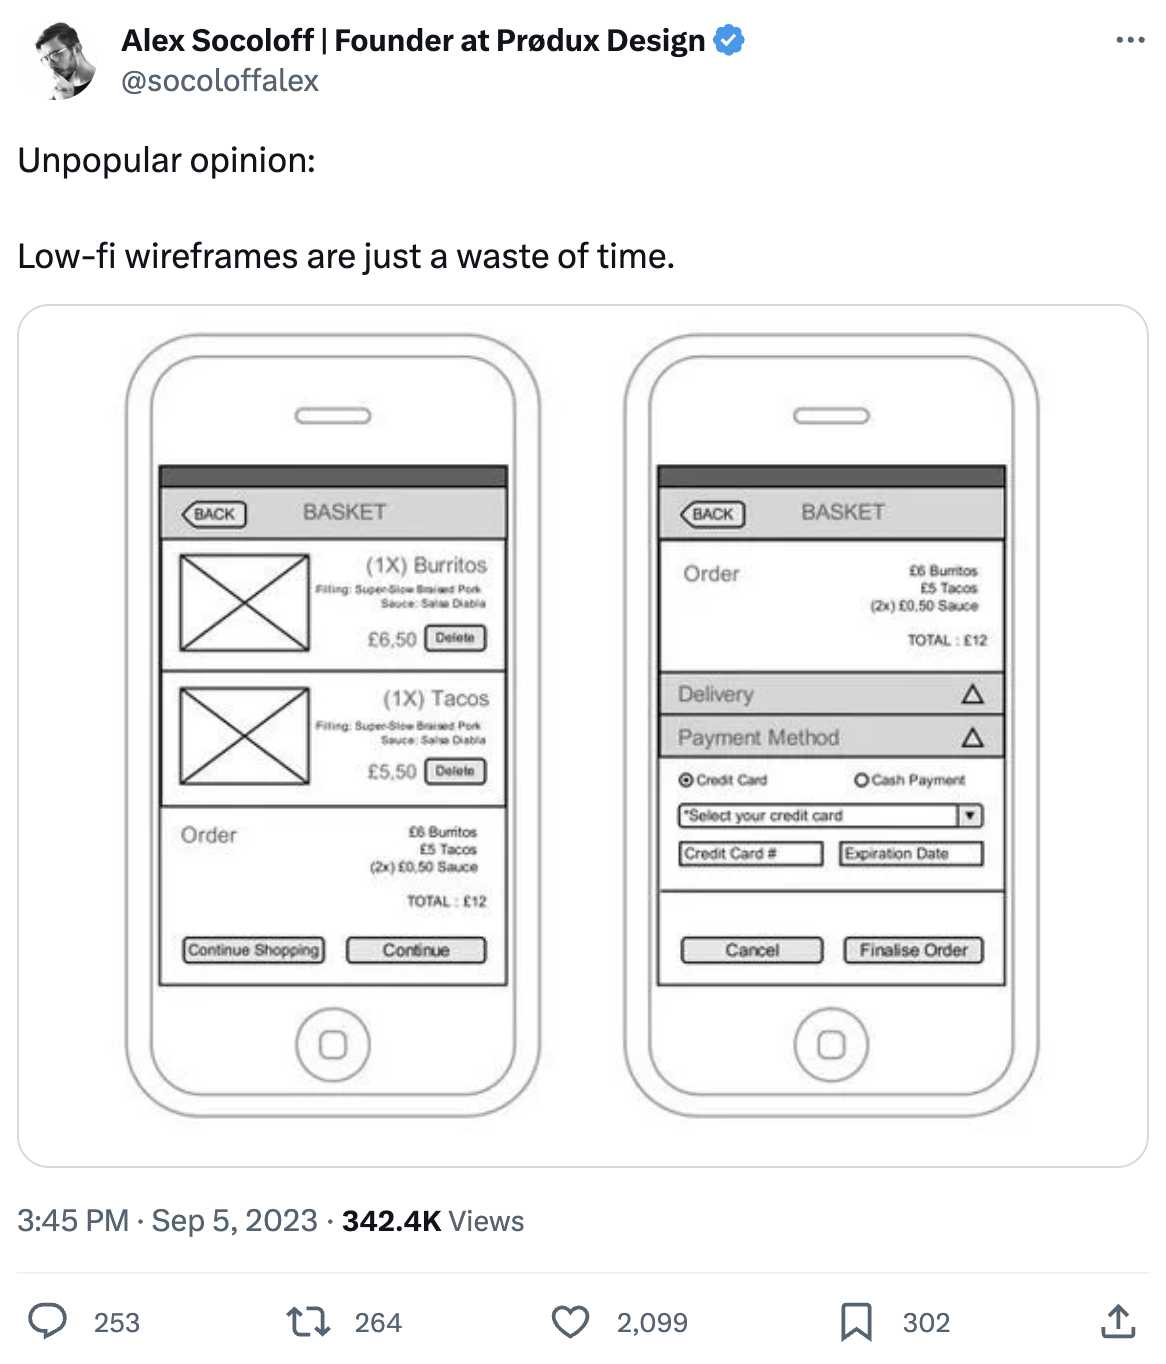 Screenshot of Alex Socoloff's tweet suggesting Low-fi wireframes are just a waste of time